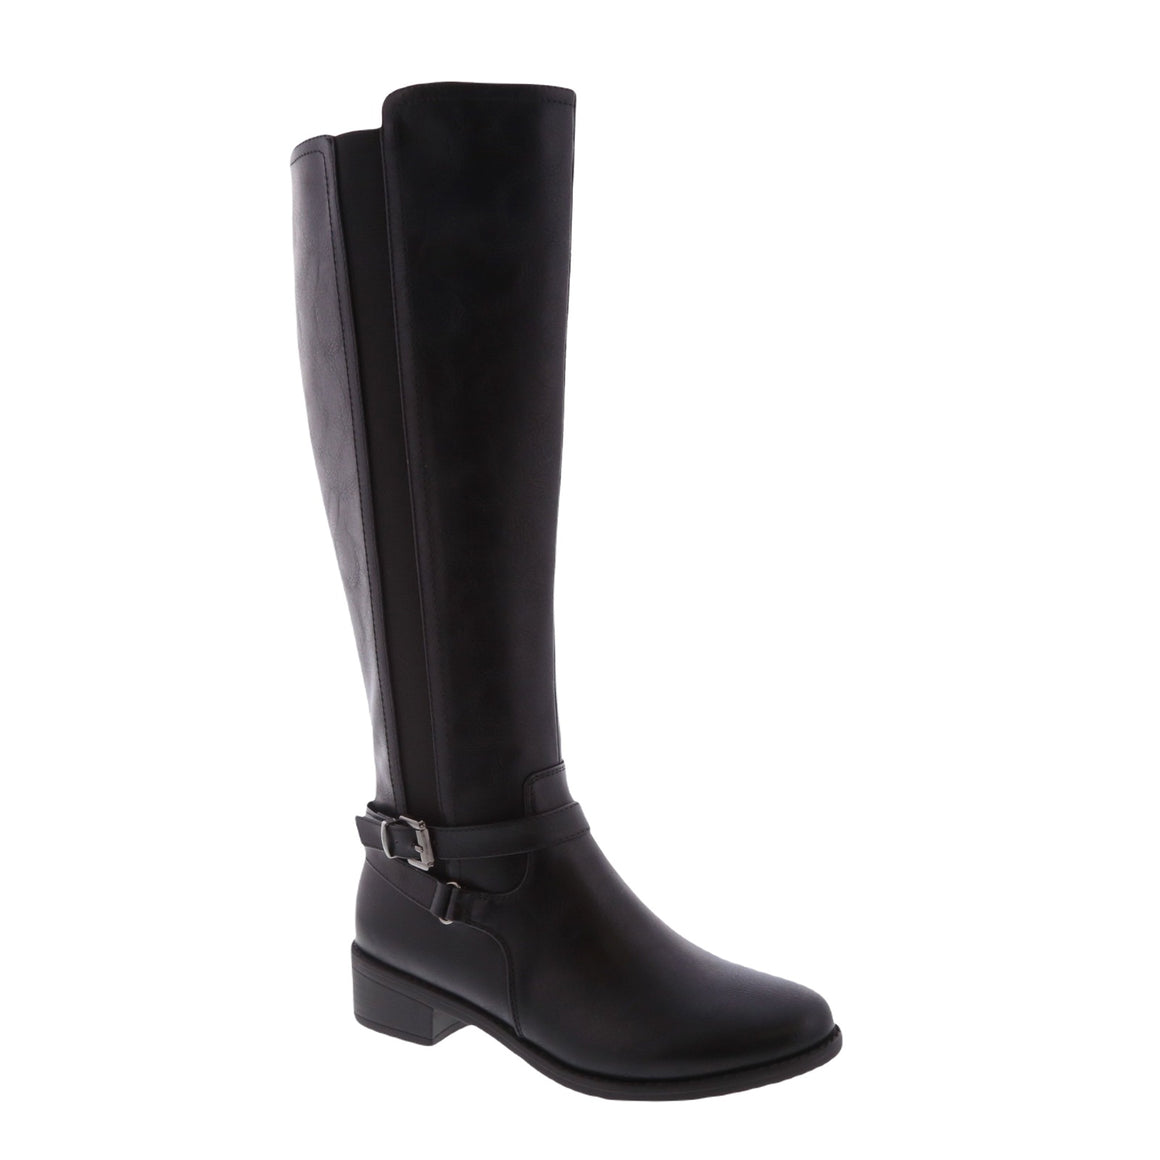 Knee High Buckled Riding Boot (BLACK)